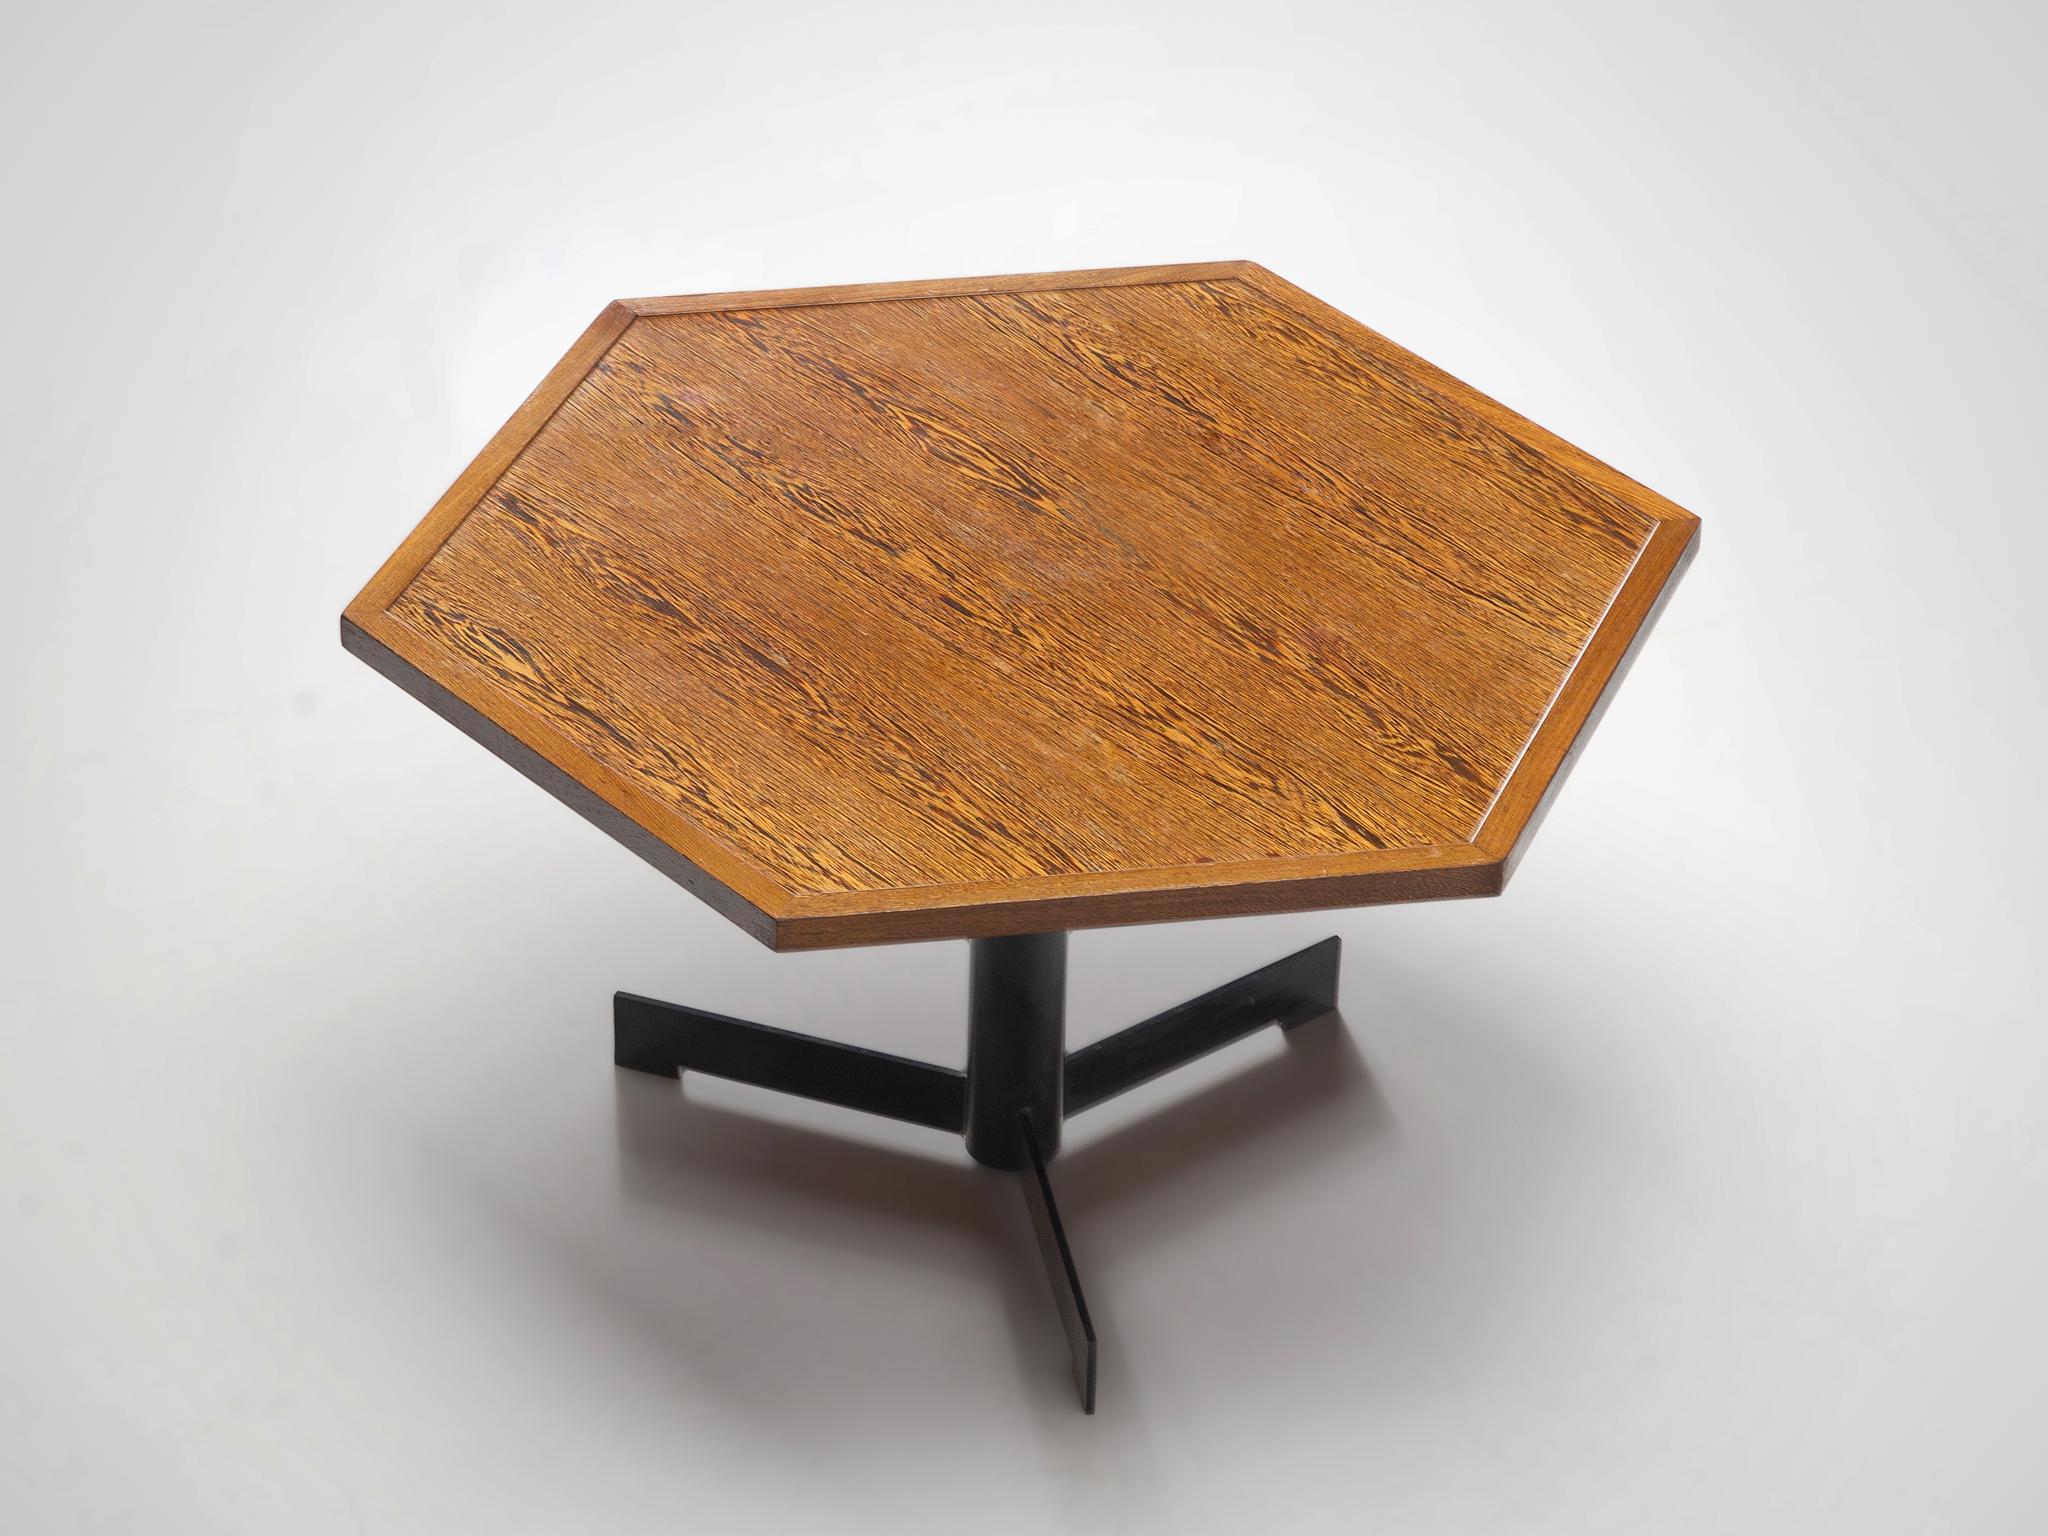 Dining table, wenge, steel, Belgium, circa 1960

This Belgium table features a hexagonal tabletop on a metal pedestal. The black pedestal consists out of a slim round base standing on three legs. With the veneered tabletop and the striped pattern